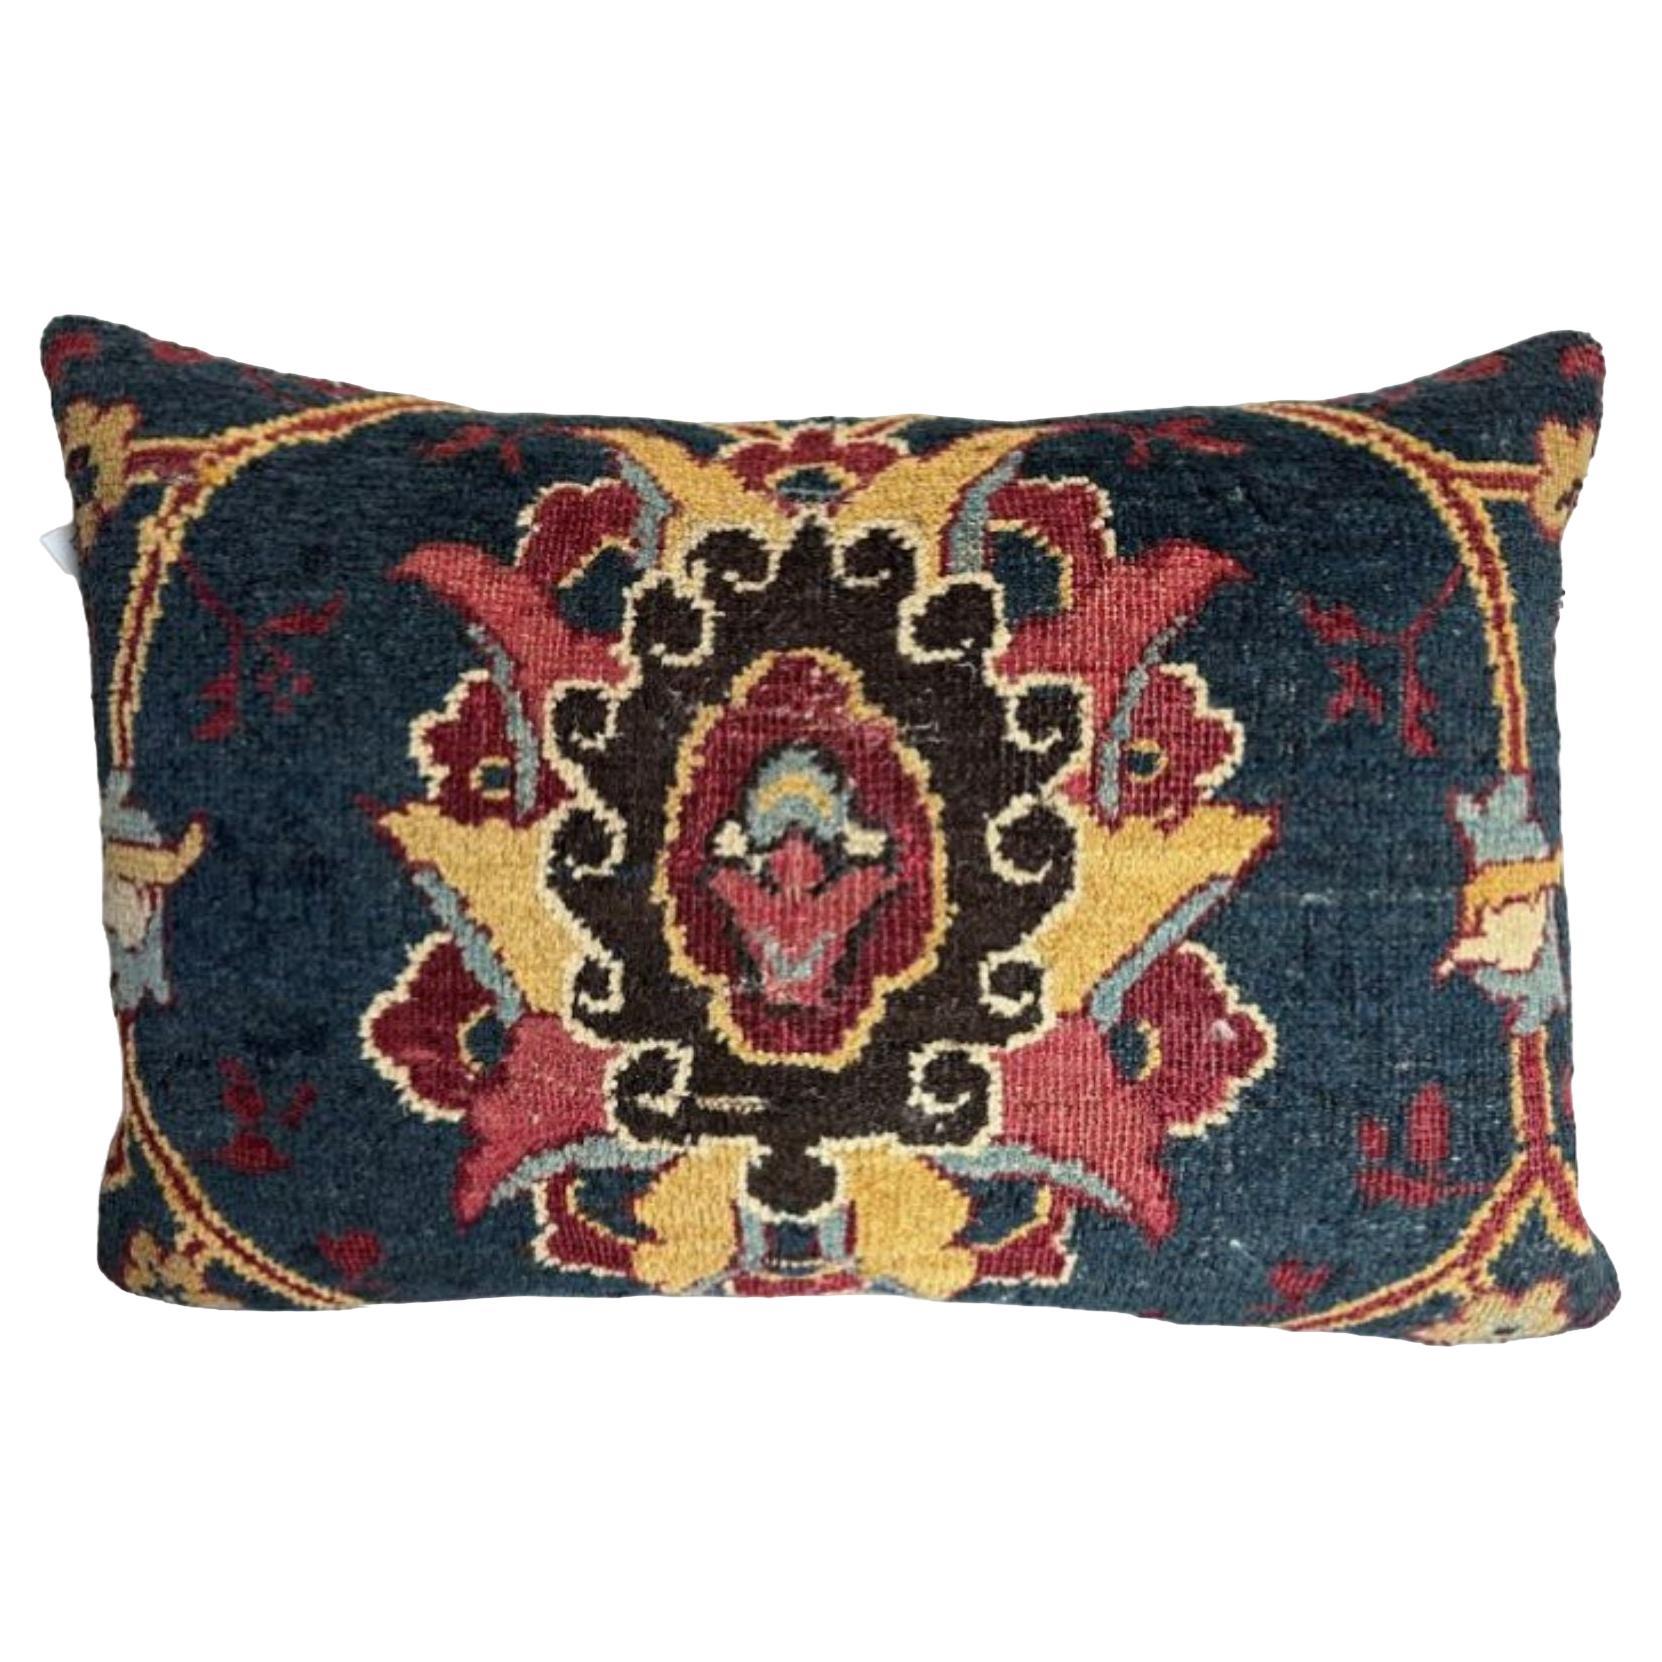 1850 Amritsar Pillow - 24" X 16" For Sale